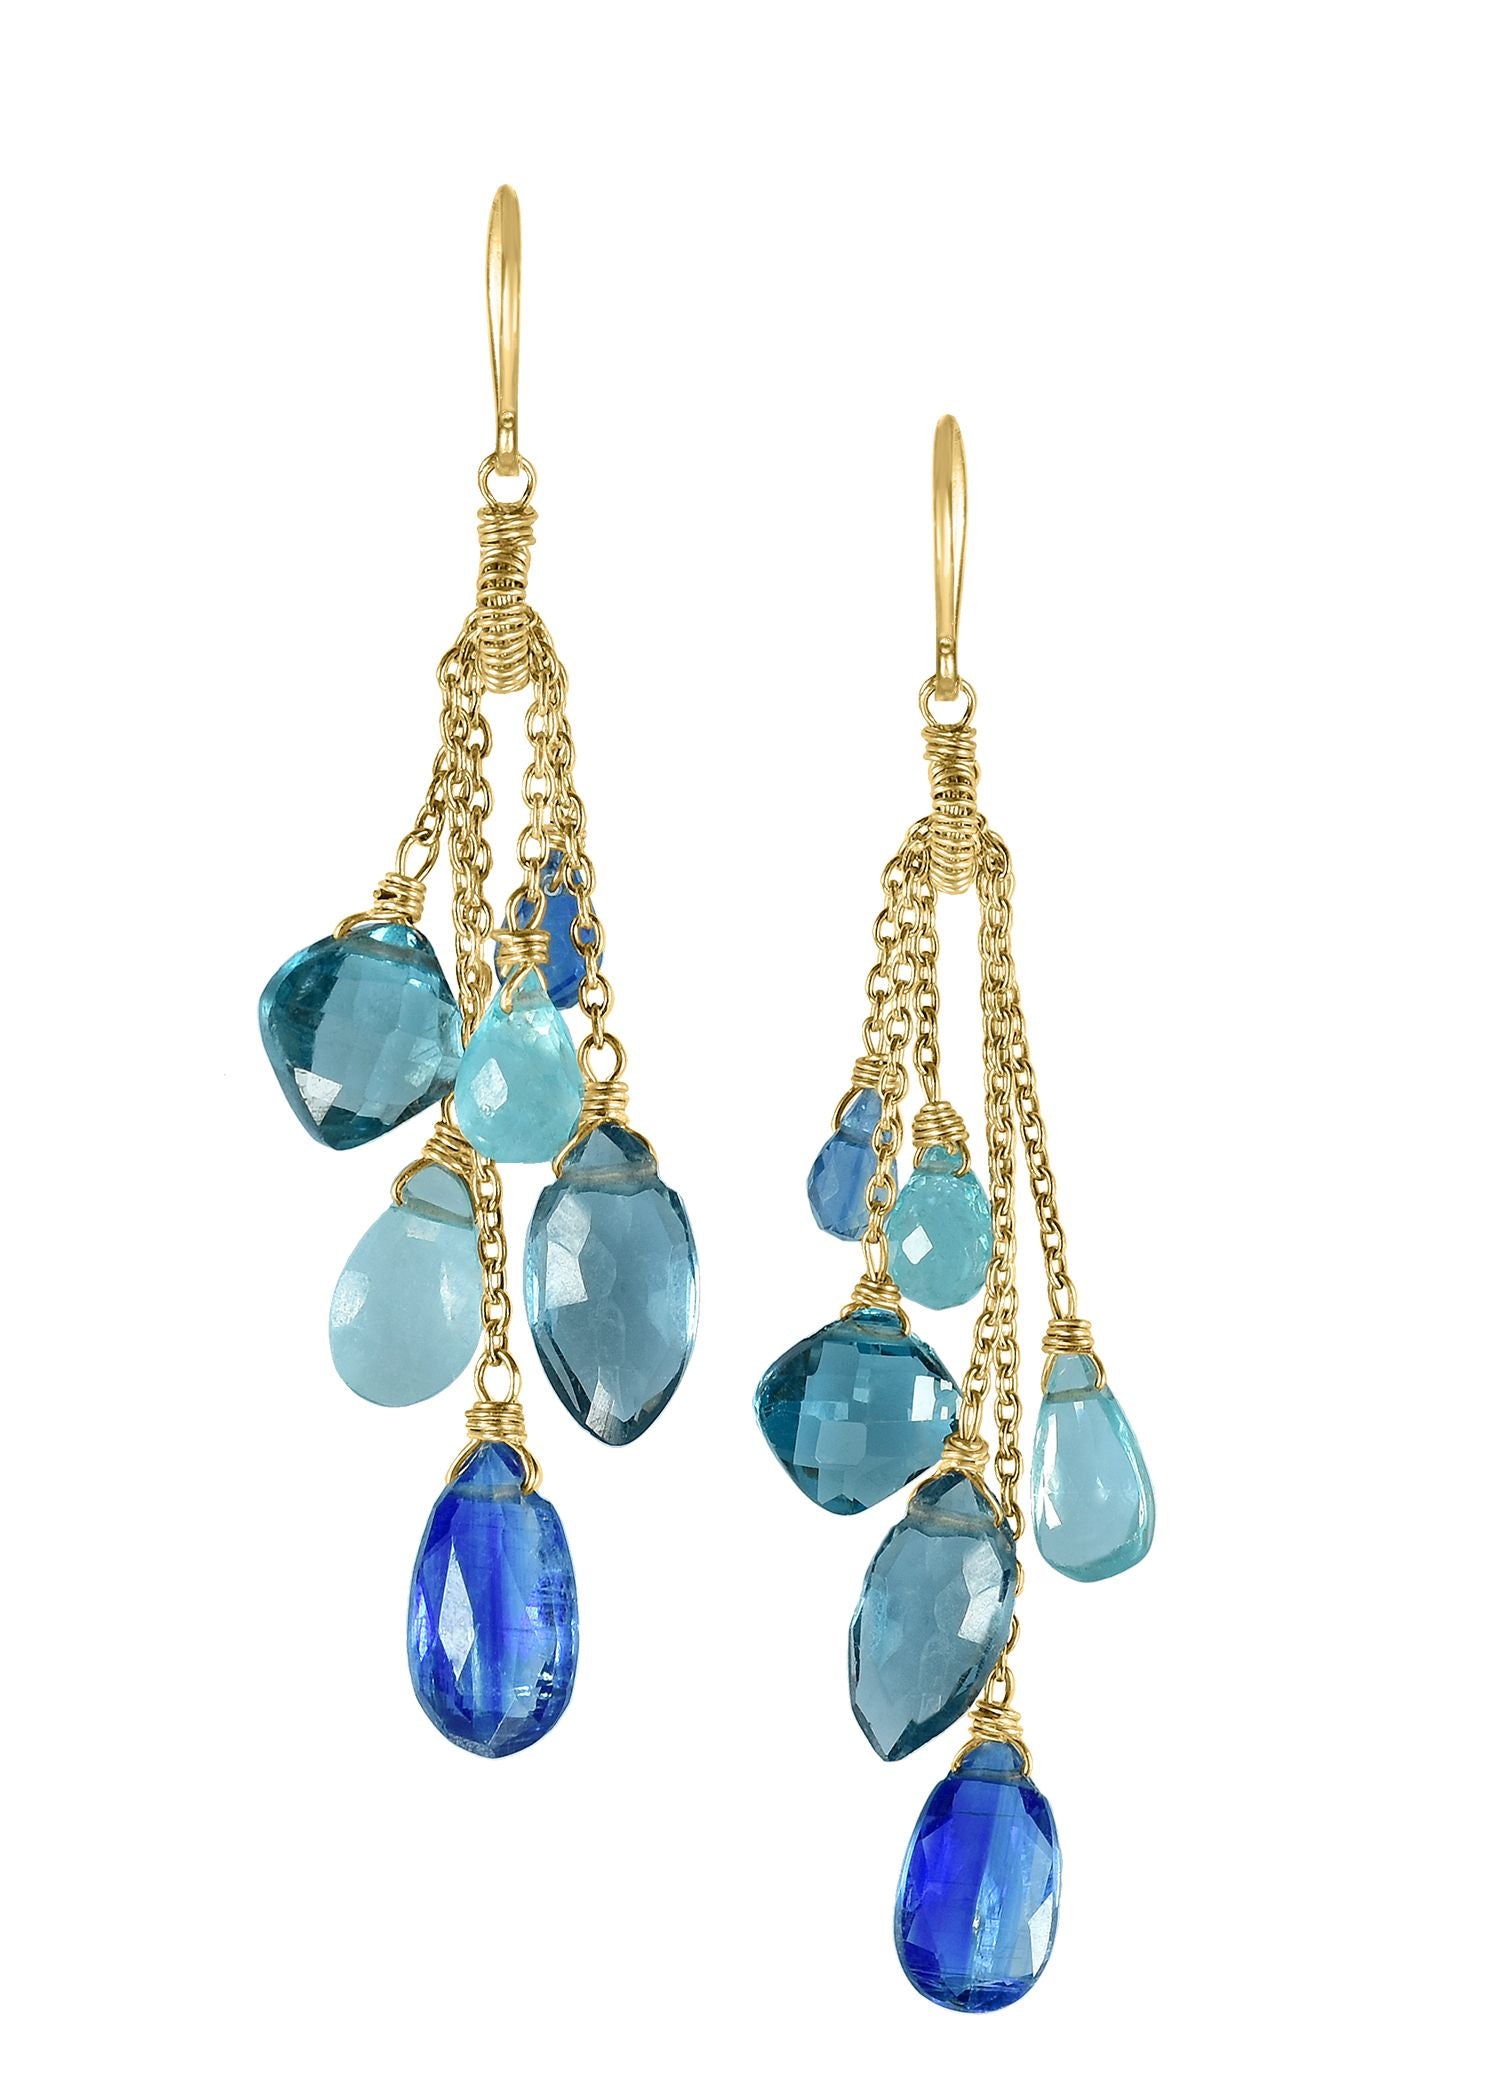 Kyanite Apatite London blue topaz 14k gold fill Earrings measure 2" in length (including the ear wires) and 5/8" in width Handmade in our Los Angeles studio